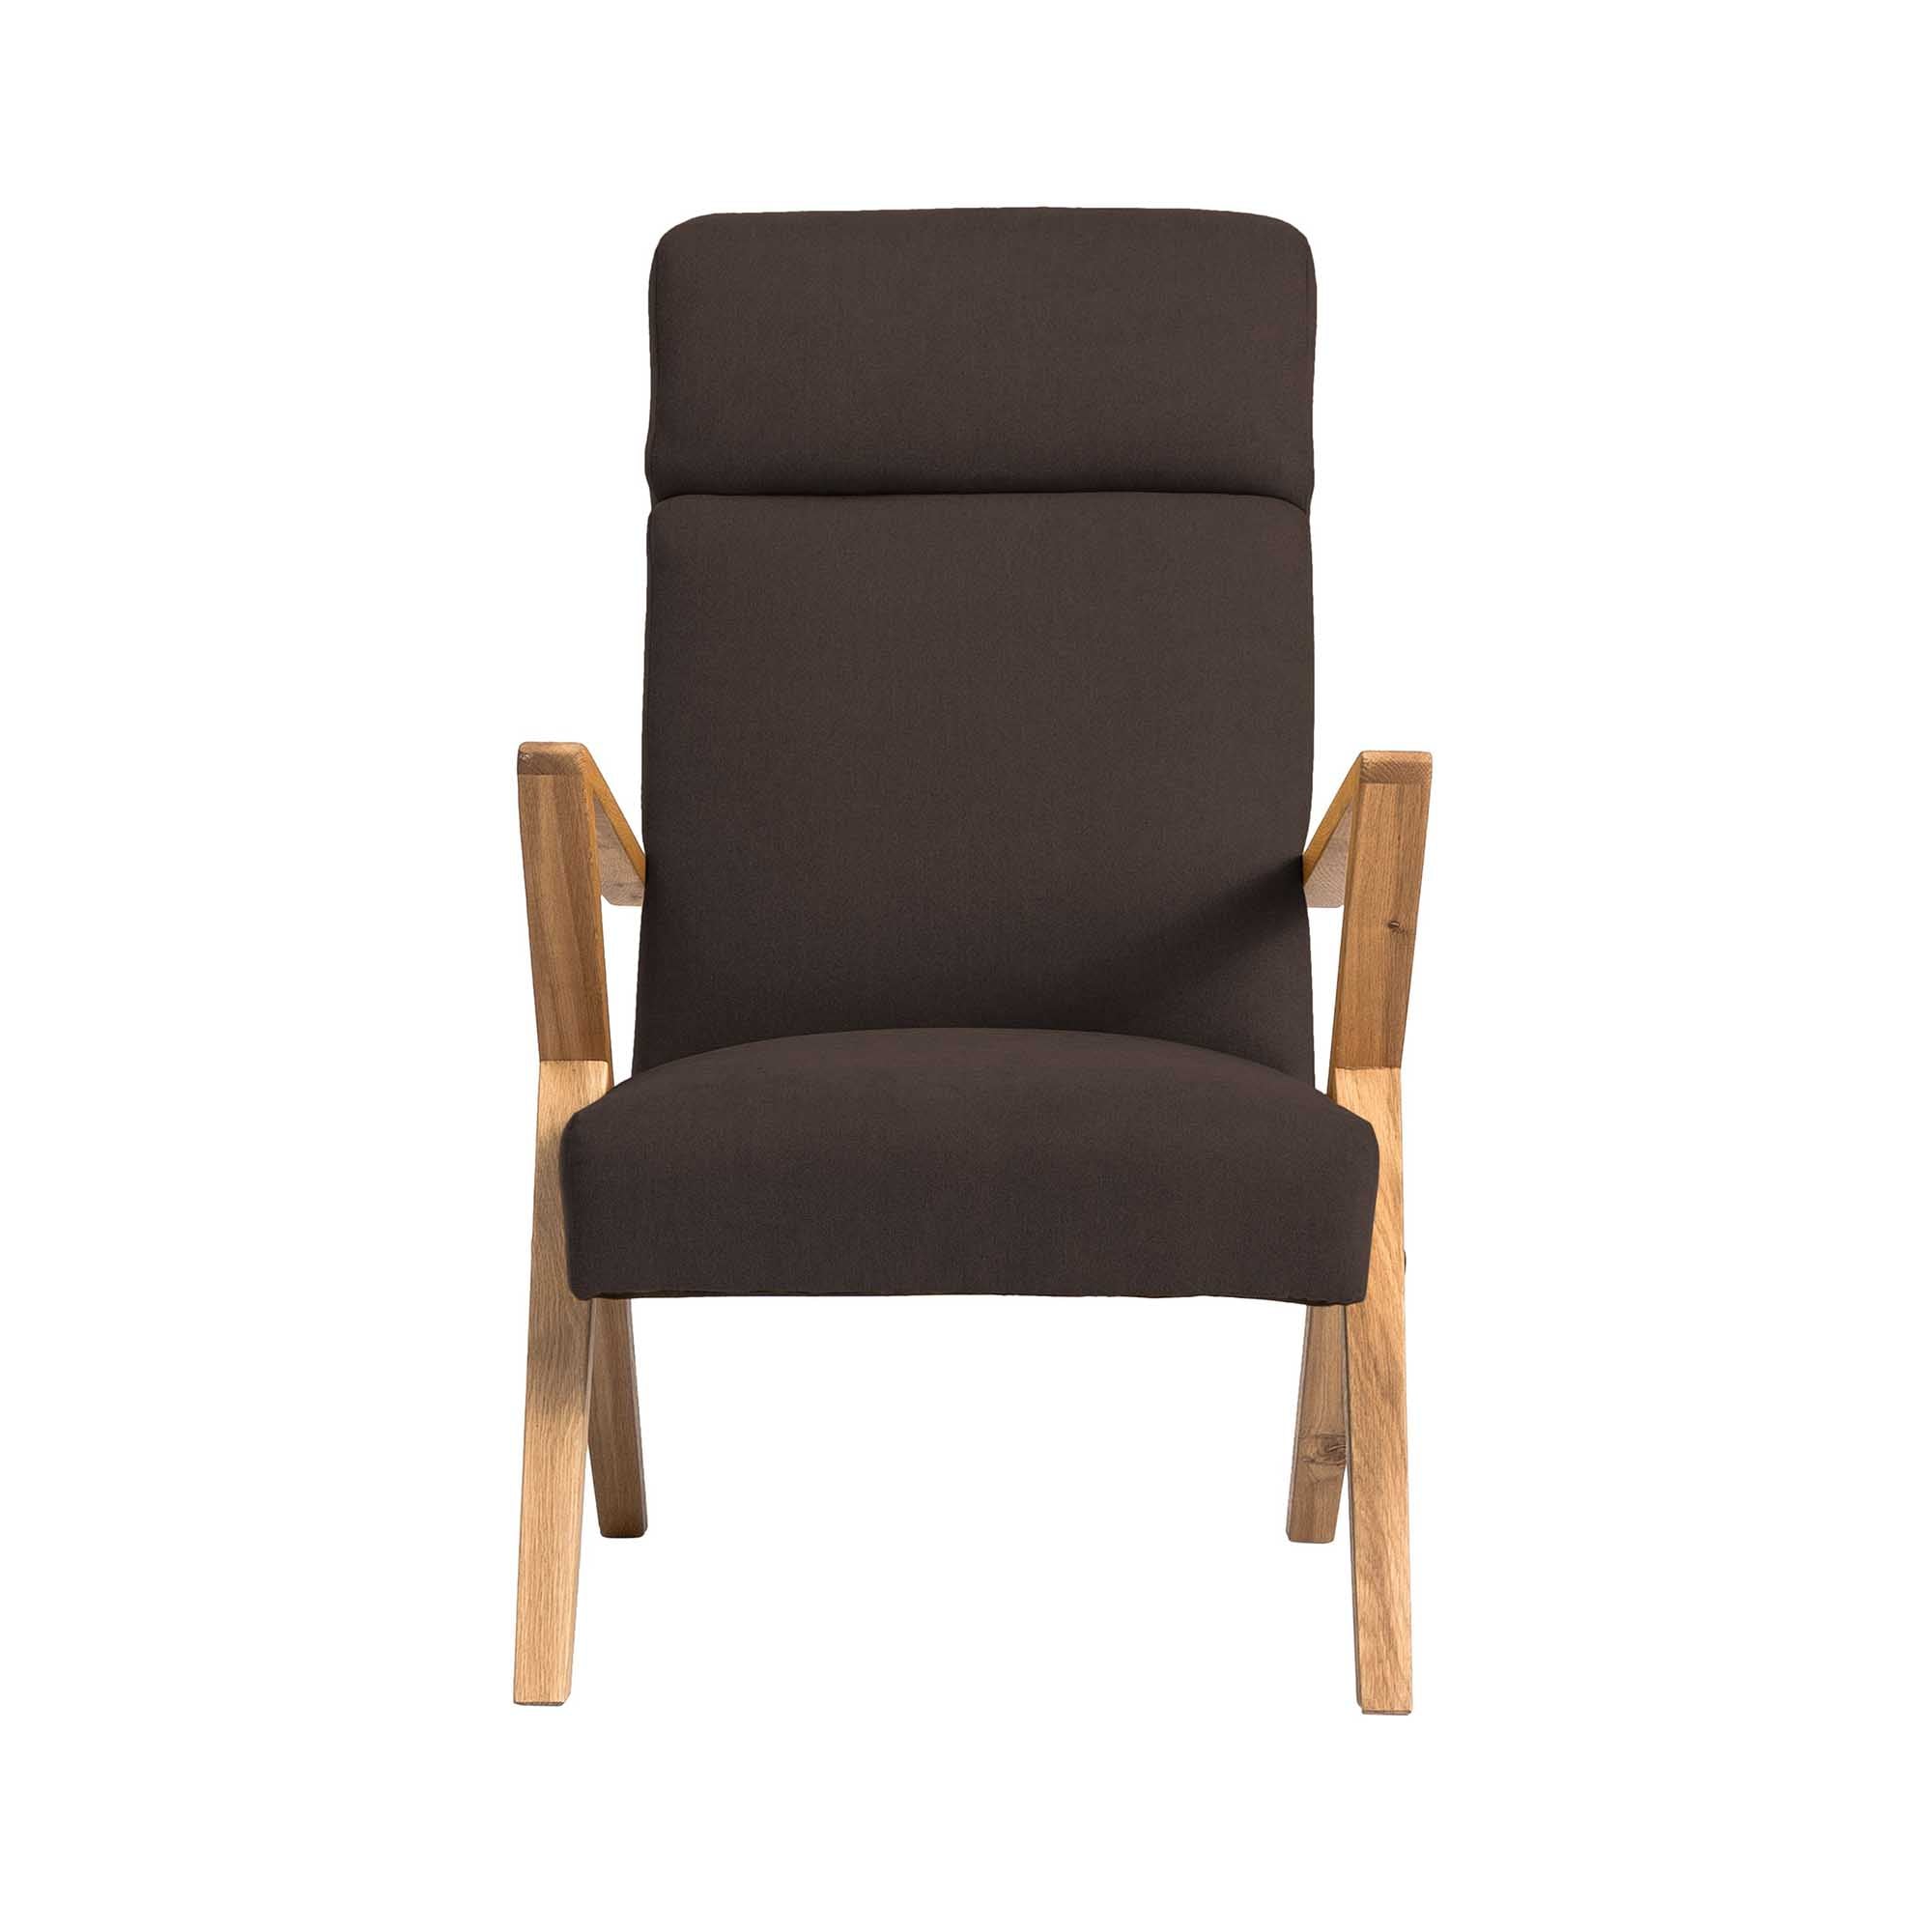 Lounge Chair, Oak Wood Frame, Natural Colour brown fabric, front view